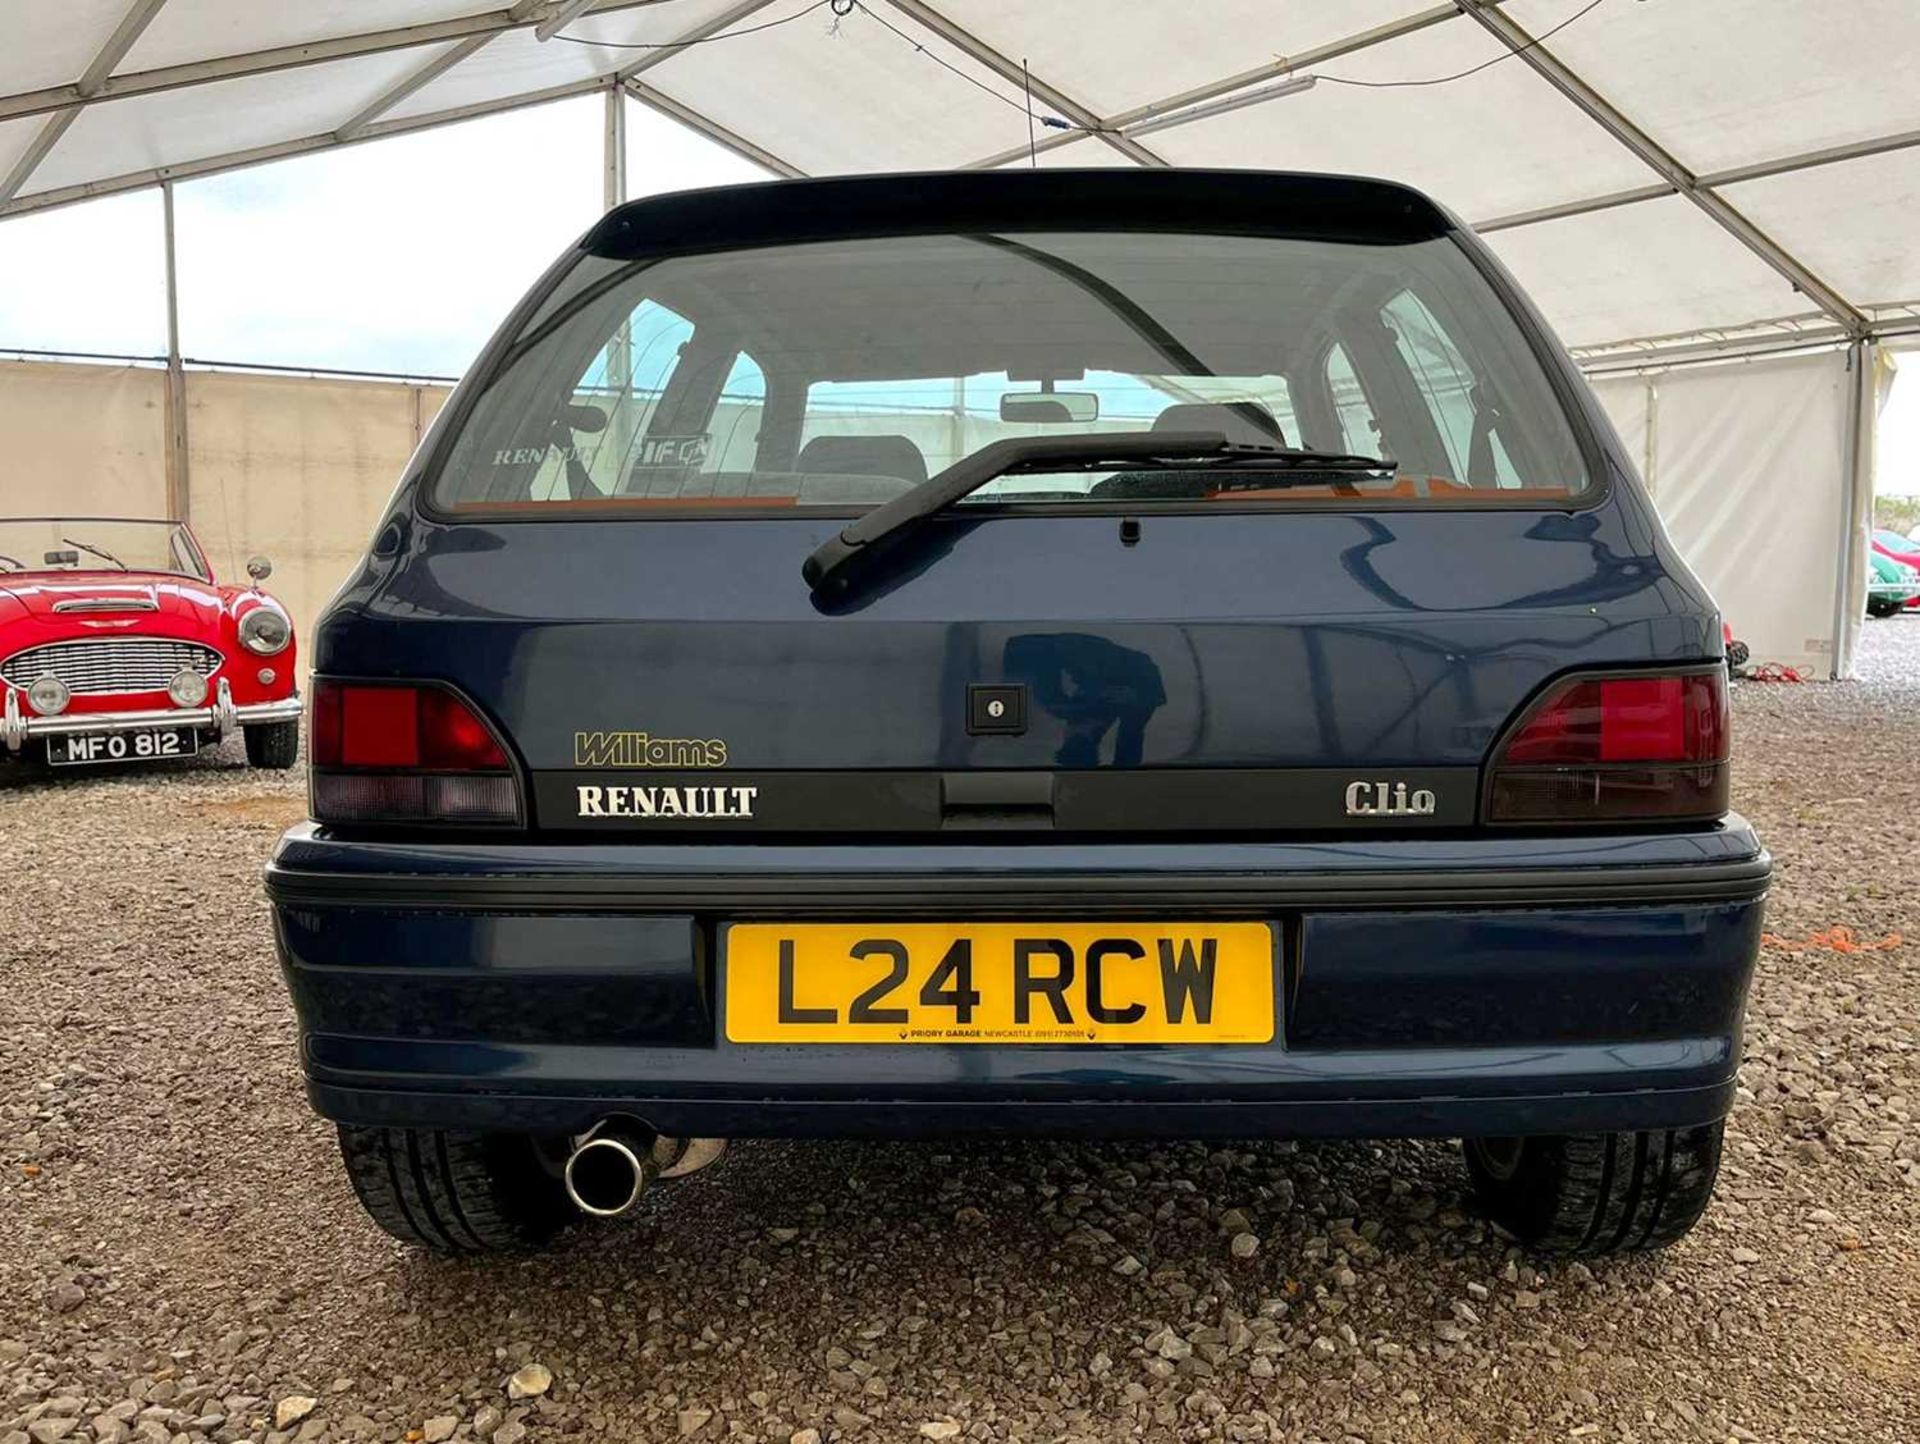 1994 Renault Clio Williams UK-delivered, first series model and said to be one of just 390 produced - Image 6 of 44